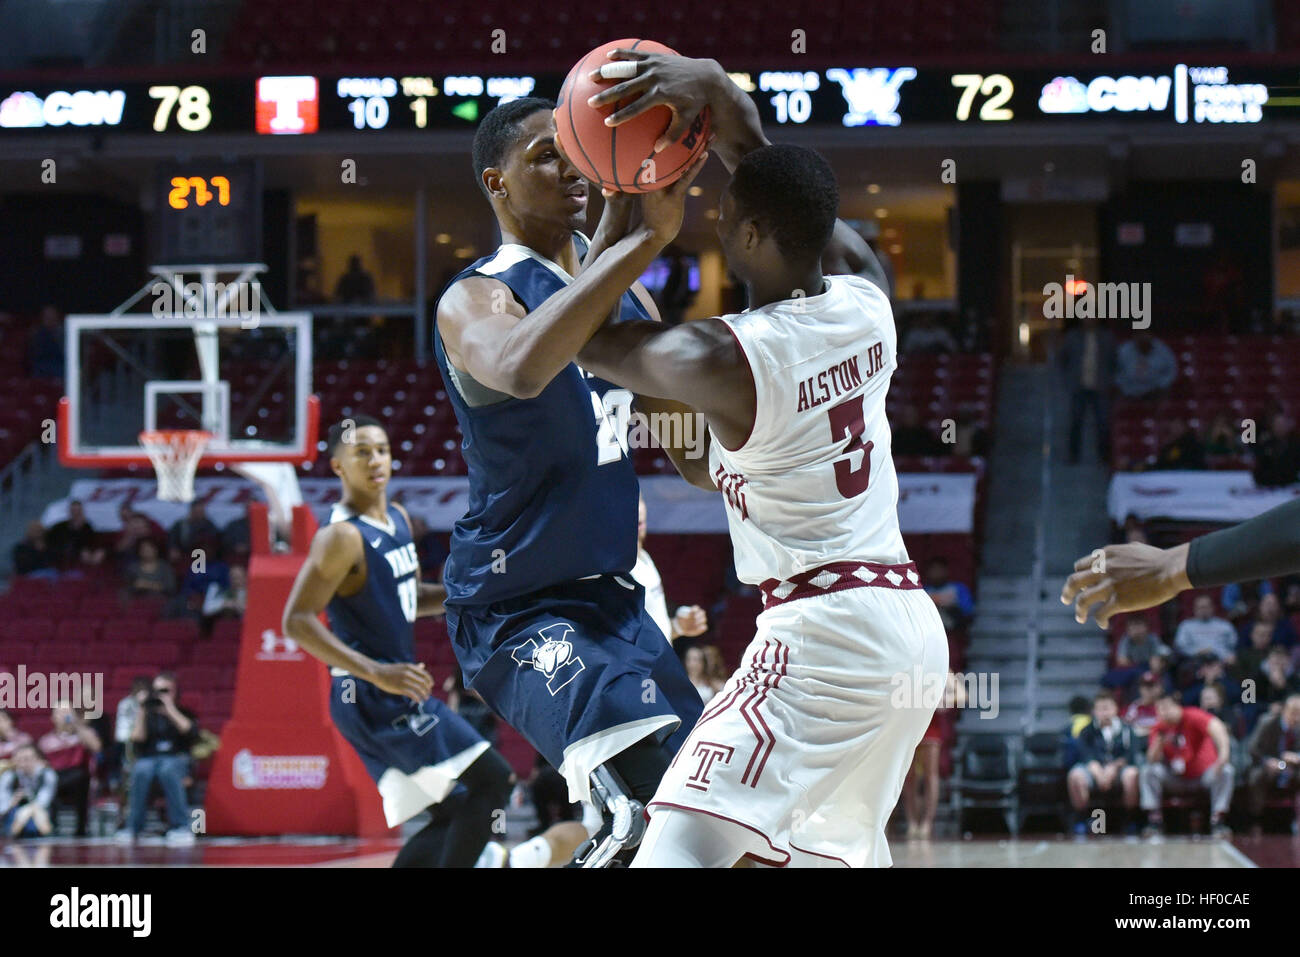 Philadelphia, Pennsylvania, USA. 22nd Dec, 2016. Yale Bulldogs forward JORDAN BRUNER (23) reaches in to tie up Temple Owls guard SHIZZ ALSTON JR. (3) during the basketball game being played at the Liacouras Center in Philadelphia. Temple beat Yale 83-77. © Ken Inness/ZUMA Wire/Alamy Live News Stock Photo